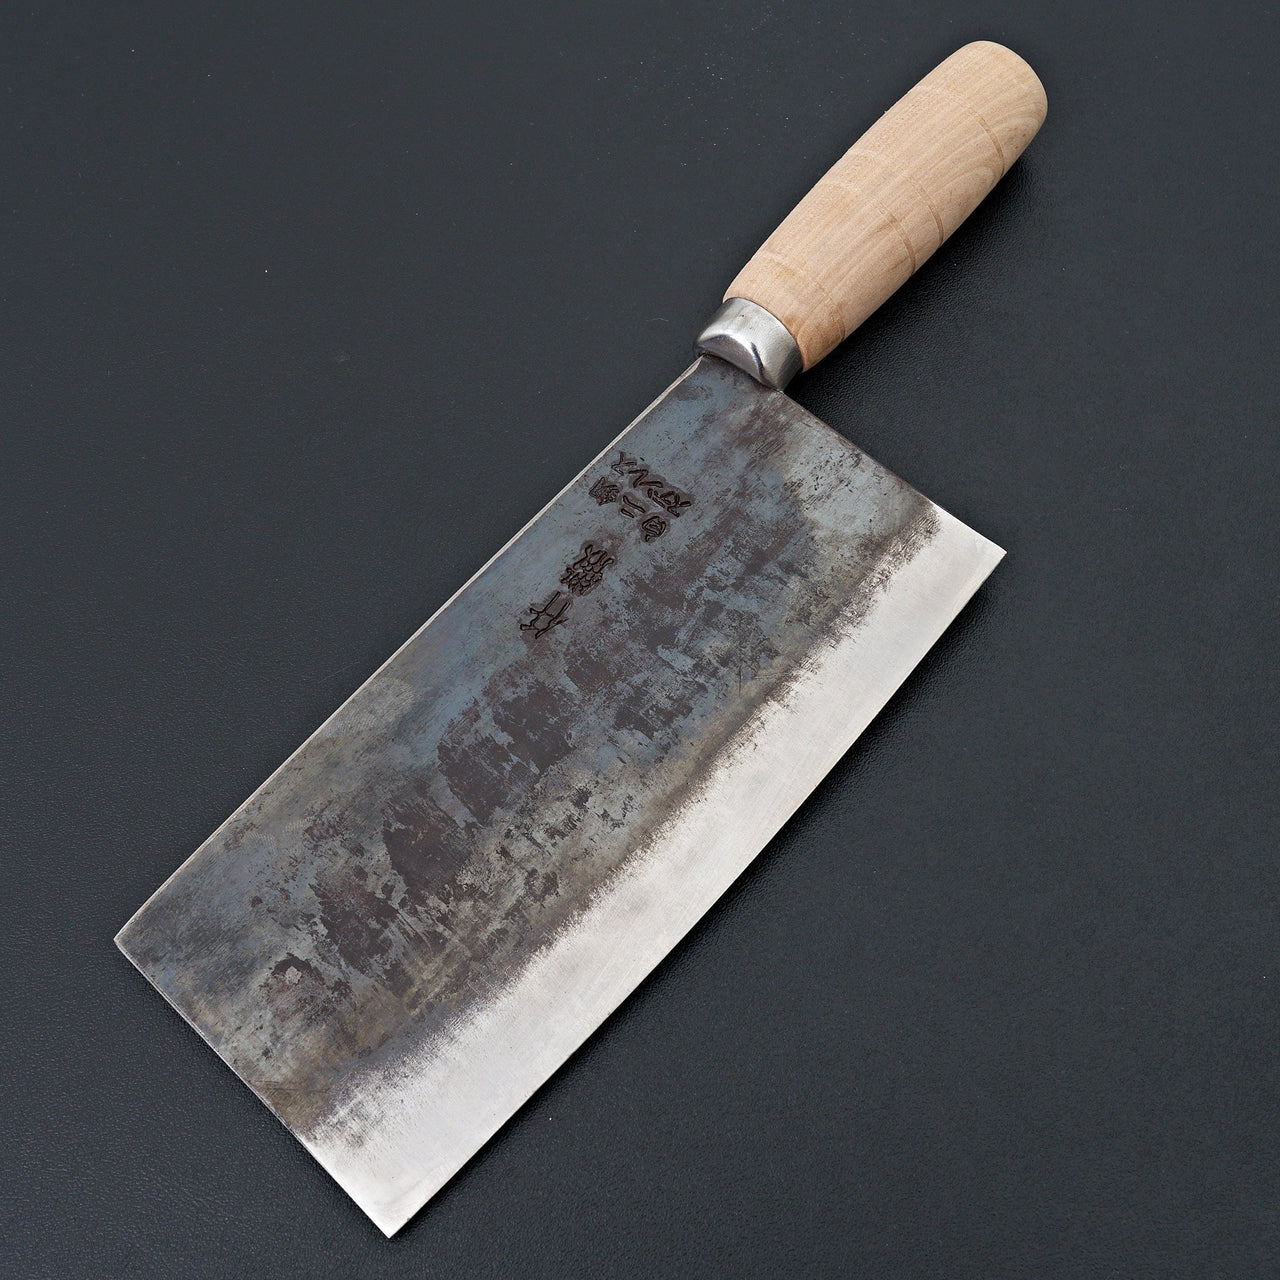 Hatsukokoro Sentan Stainless Clad White #2 Chinese Cleaver 200mm-Knife-Handk-Carbon Knife Co